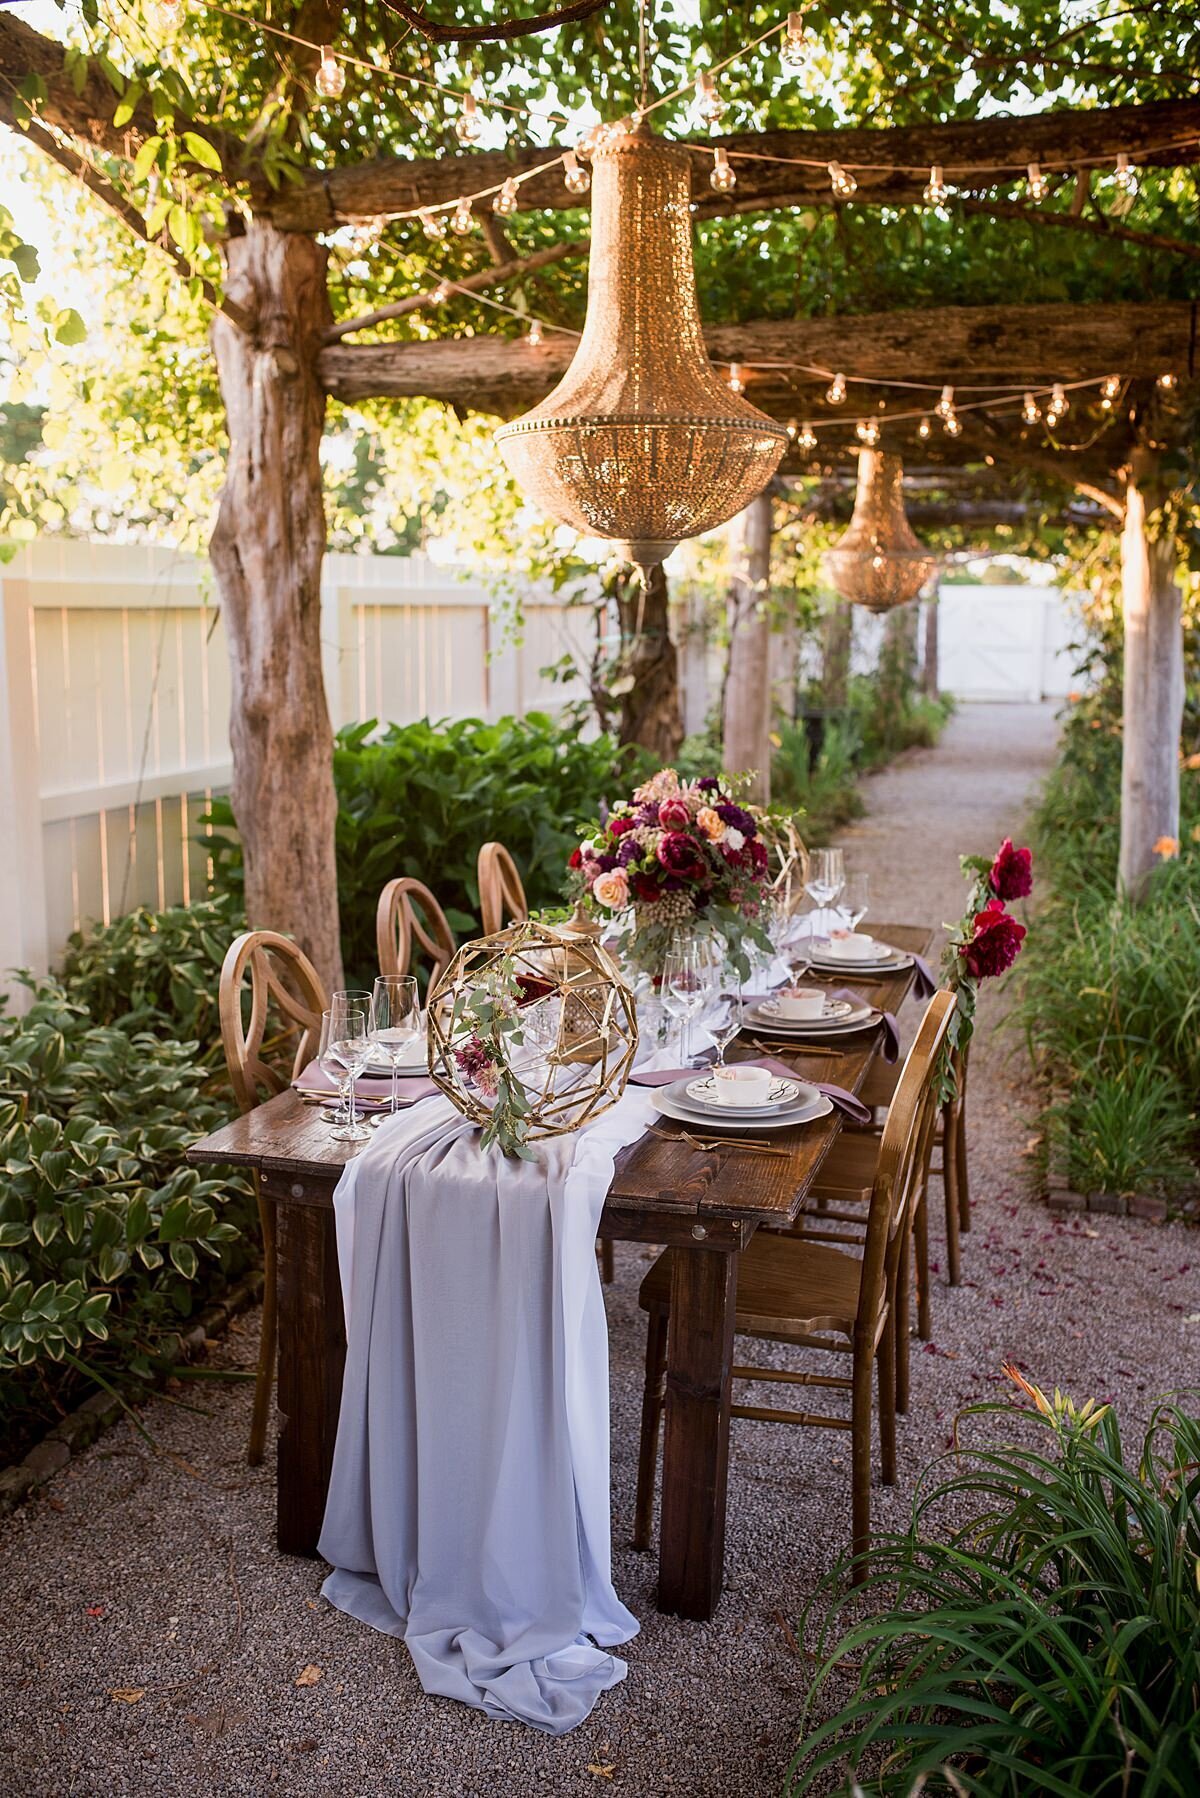 Elegant boho wedding under a rustic wood arbor with hanging wisteria  vines, string lighting and long brass filigree chandeliers. A dark wood farm table sits in a lush garden at Carnton Plantation. The farm table has a long soft gray organza table runner with wood chairs with geometric shaped backs. The table as large gold geometric spheres and a large floral centerpiece in a gold footed bowl. The flowers are burgundy dahlias, burgundy peonies, peach roses, blush tea roses, king protea, prince protea and greenery. Stacked plates of a white scalloped charger, a light gray dinner plate, a white salad plate with gold geometric patterns and a white bowl with gold flatware on either side of the plates.